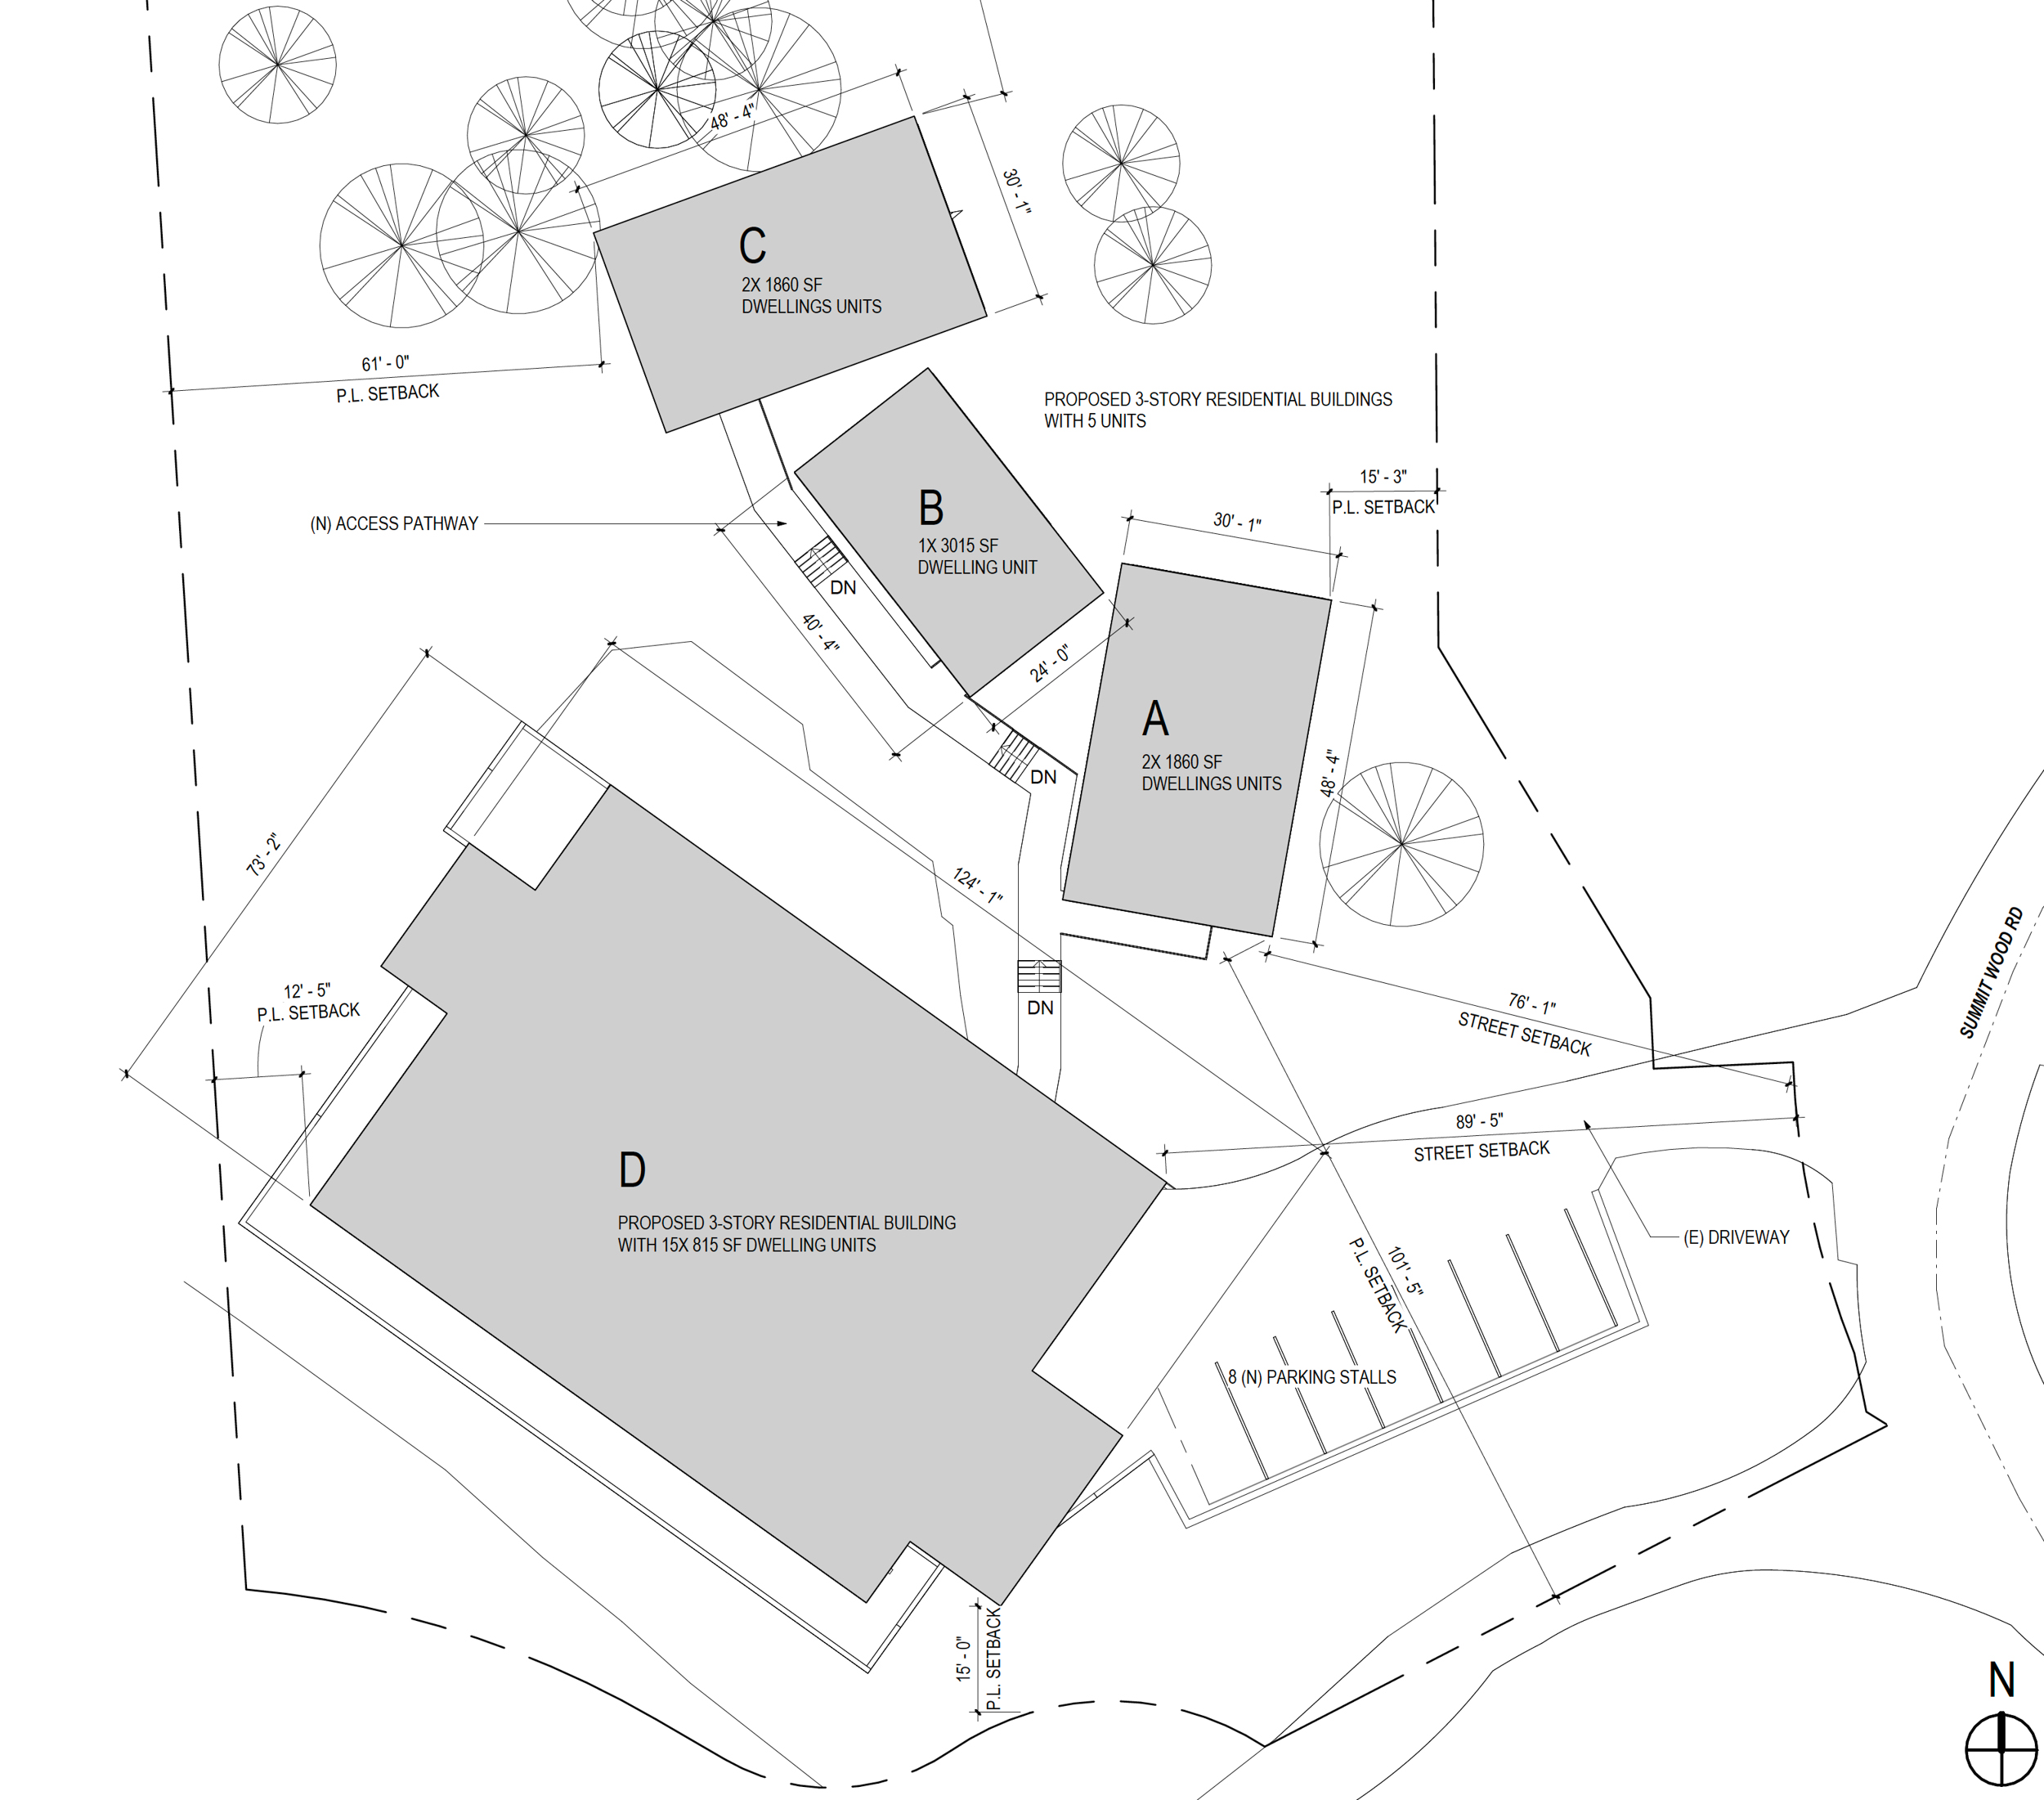 11511 Summit Wood Road site map, illustration by OpenScope Studio